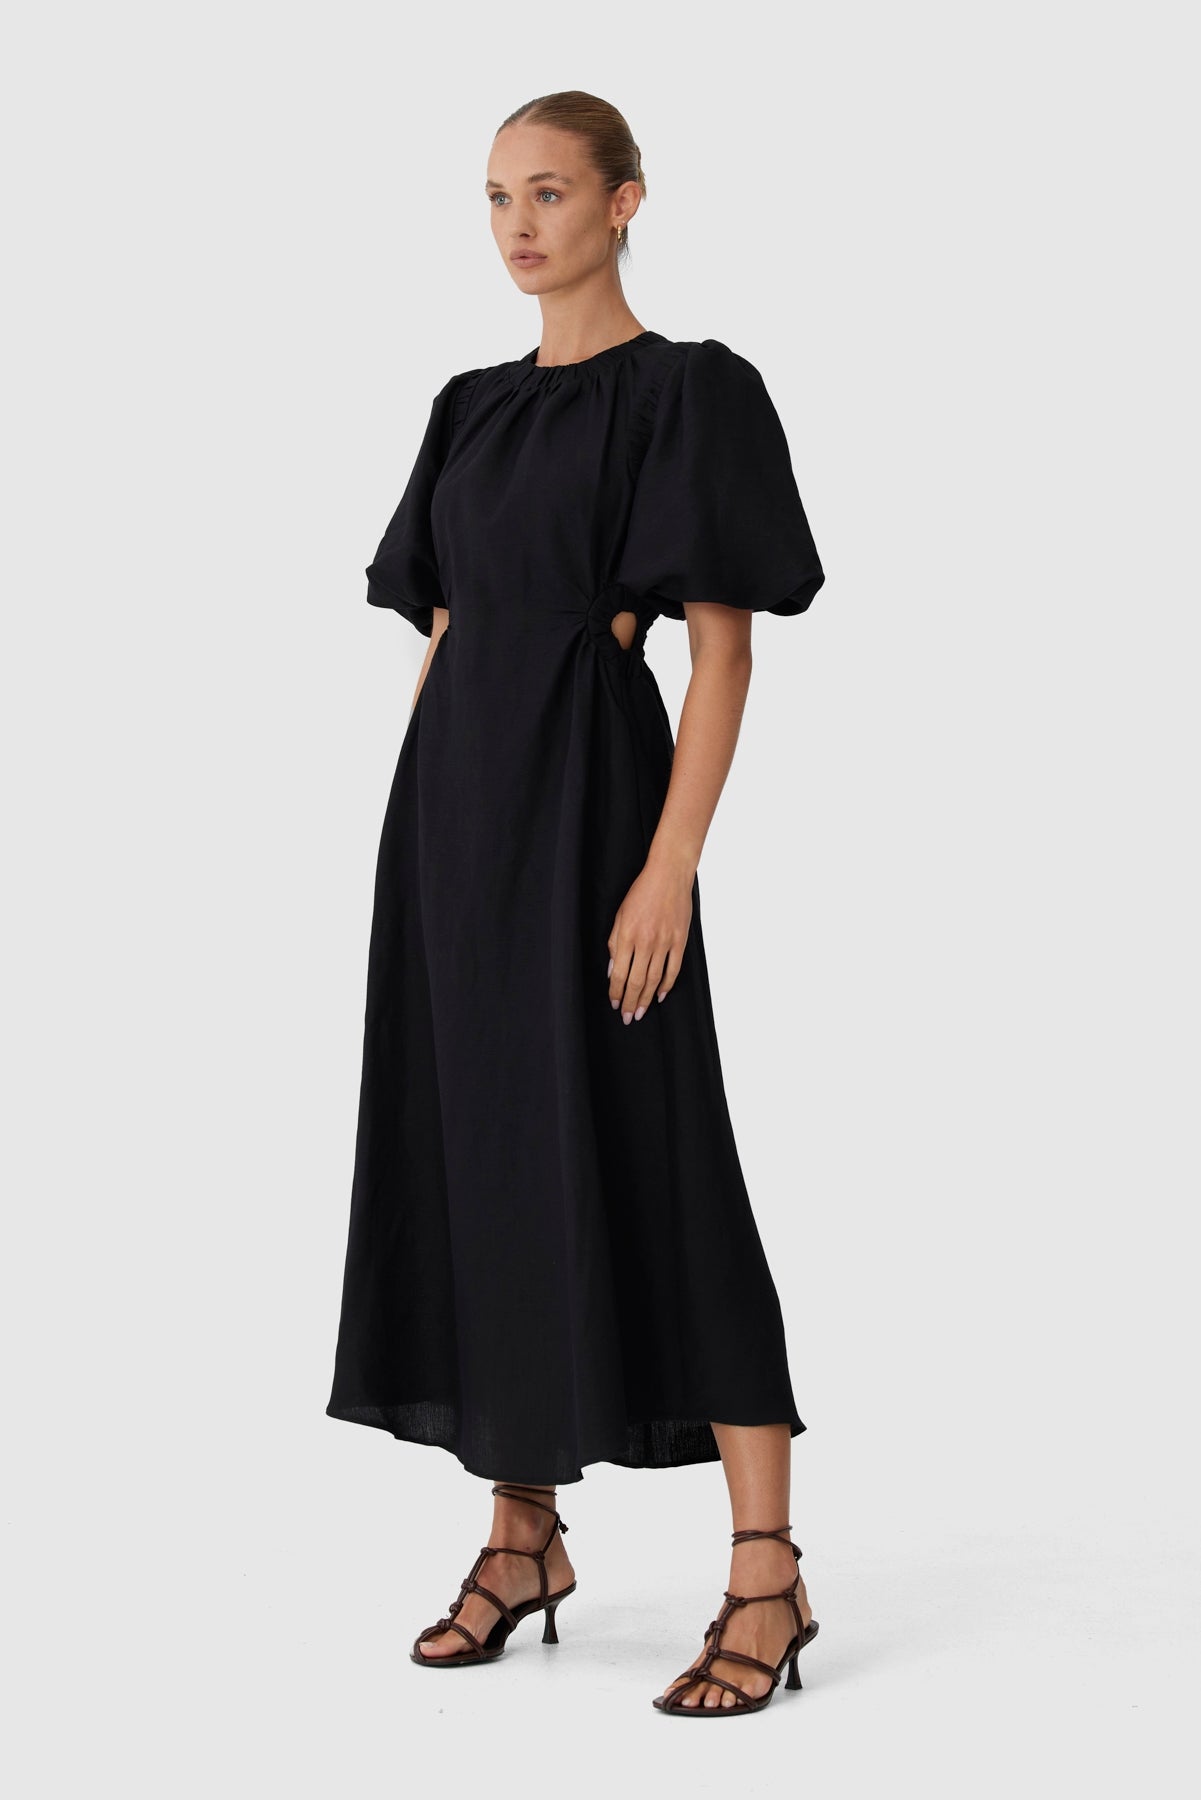 C/MEO Collective - Now And Forever Dress - Black – Fashion Bunker US